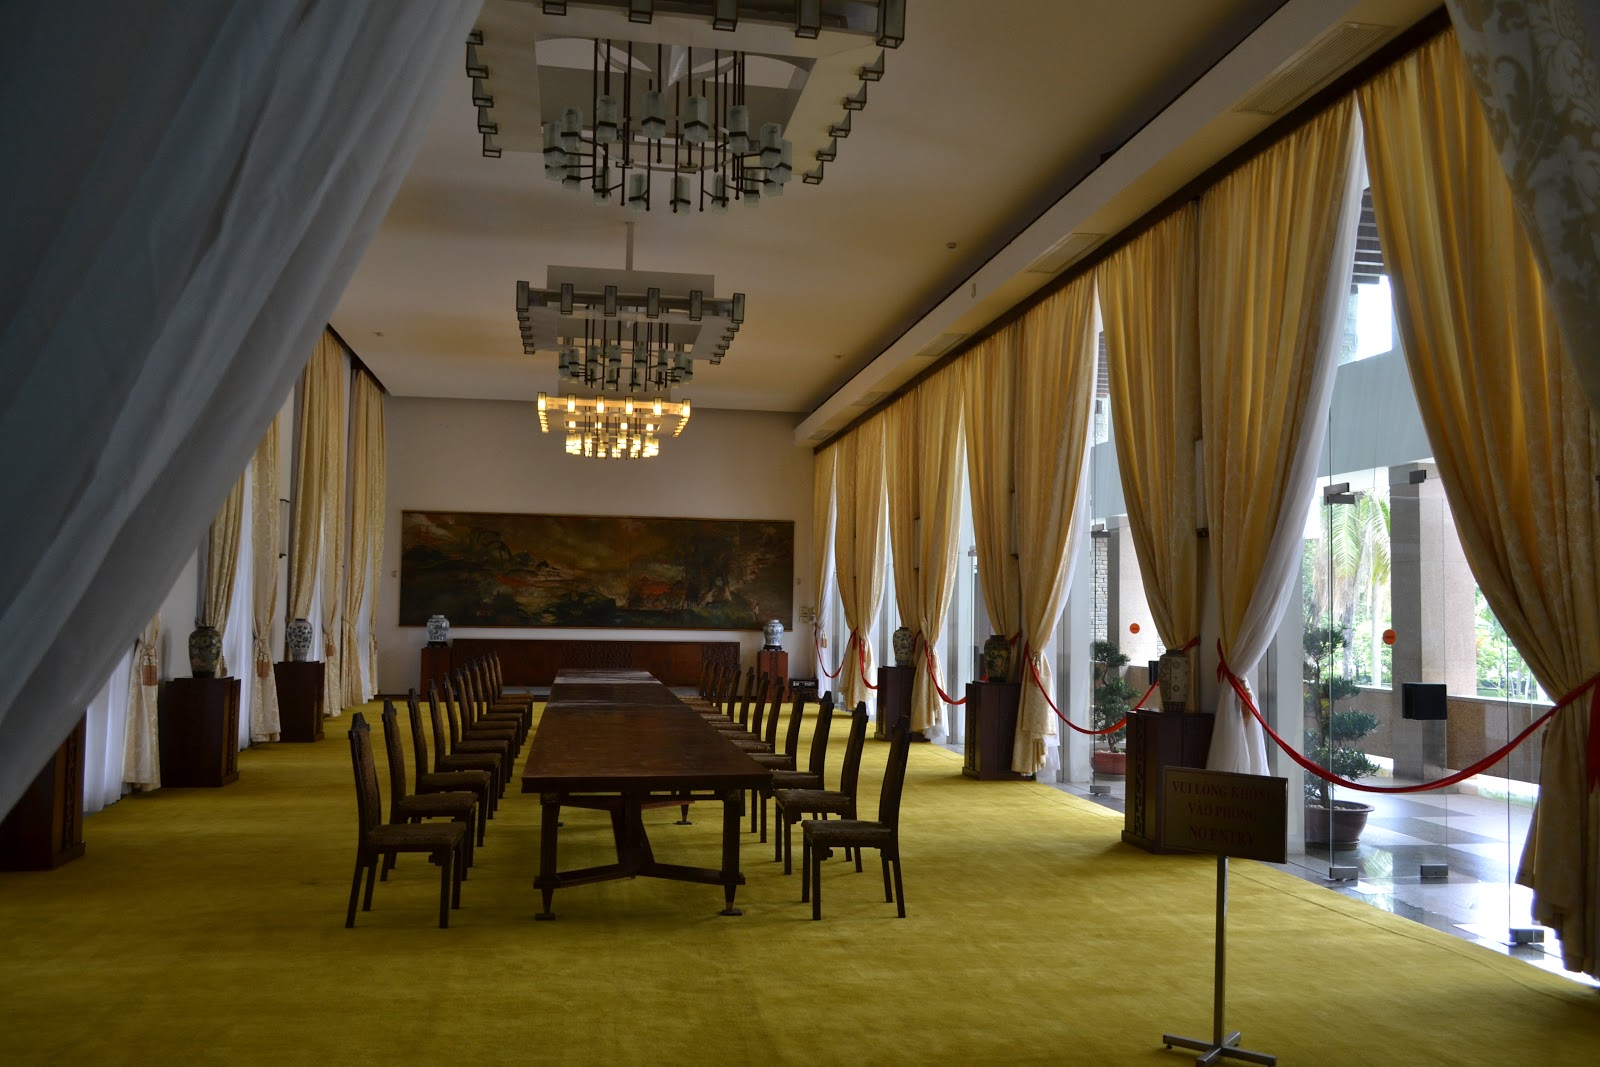 The Banquet Chamber inside Reunification place